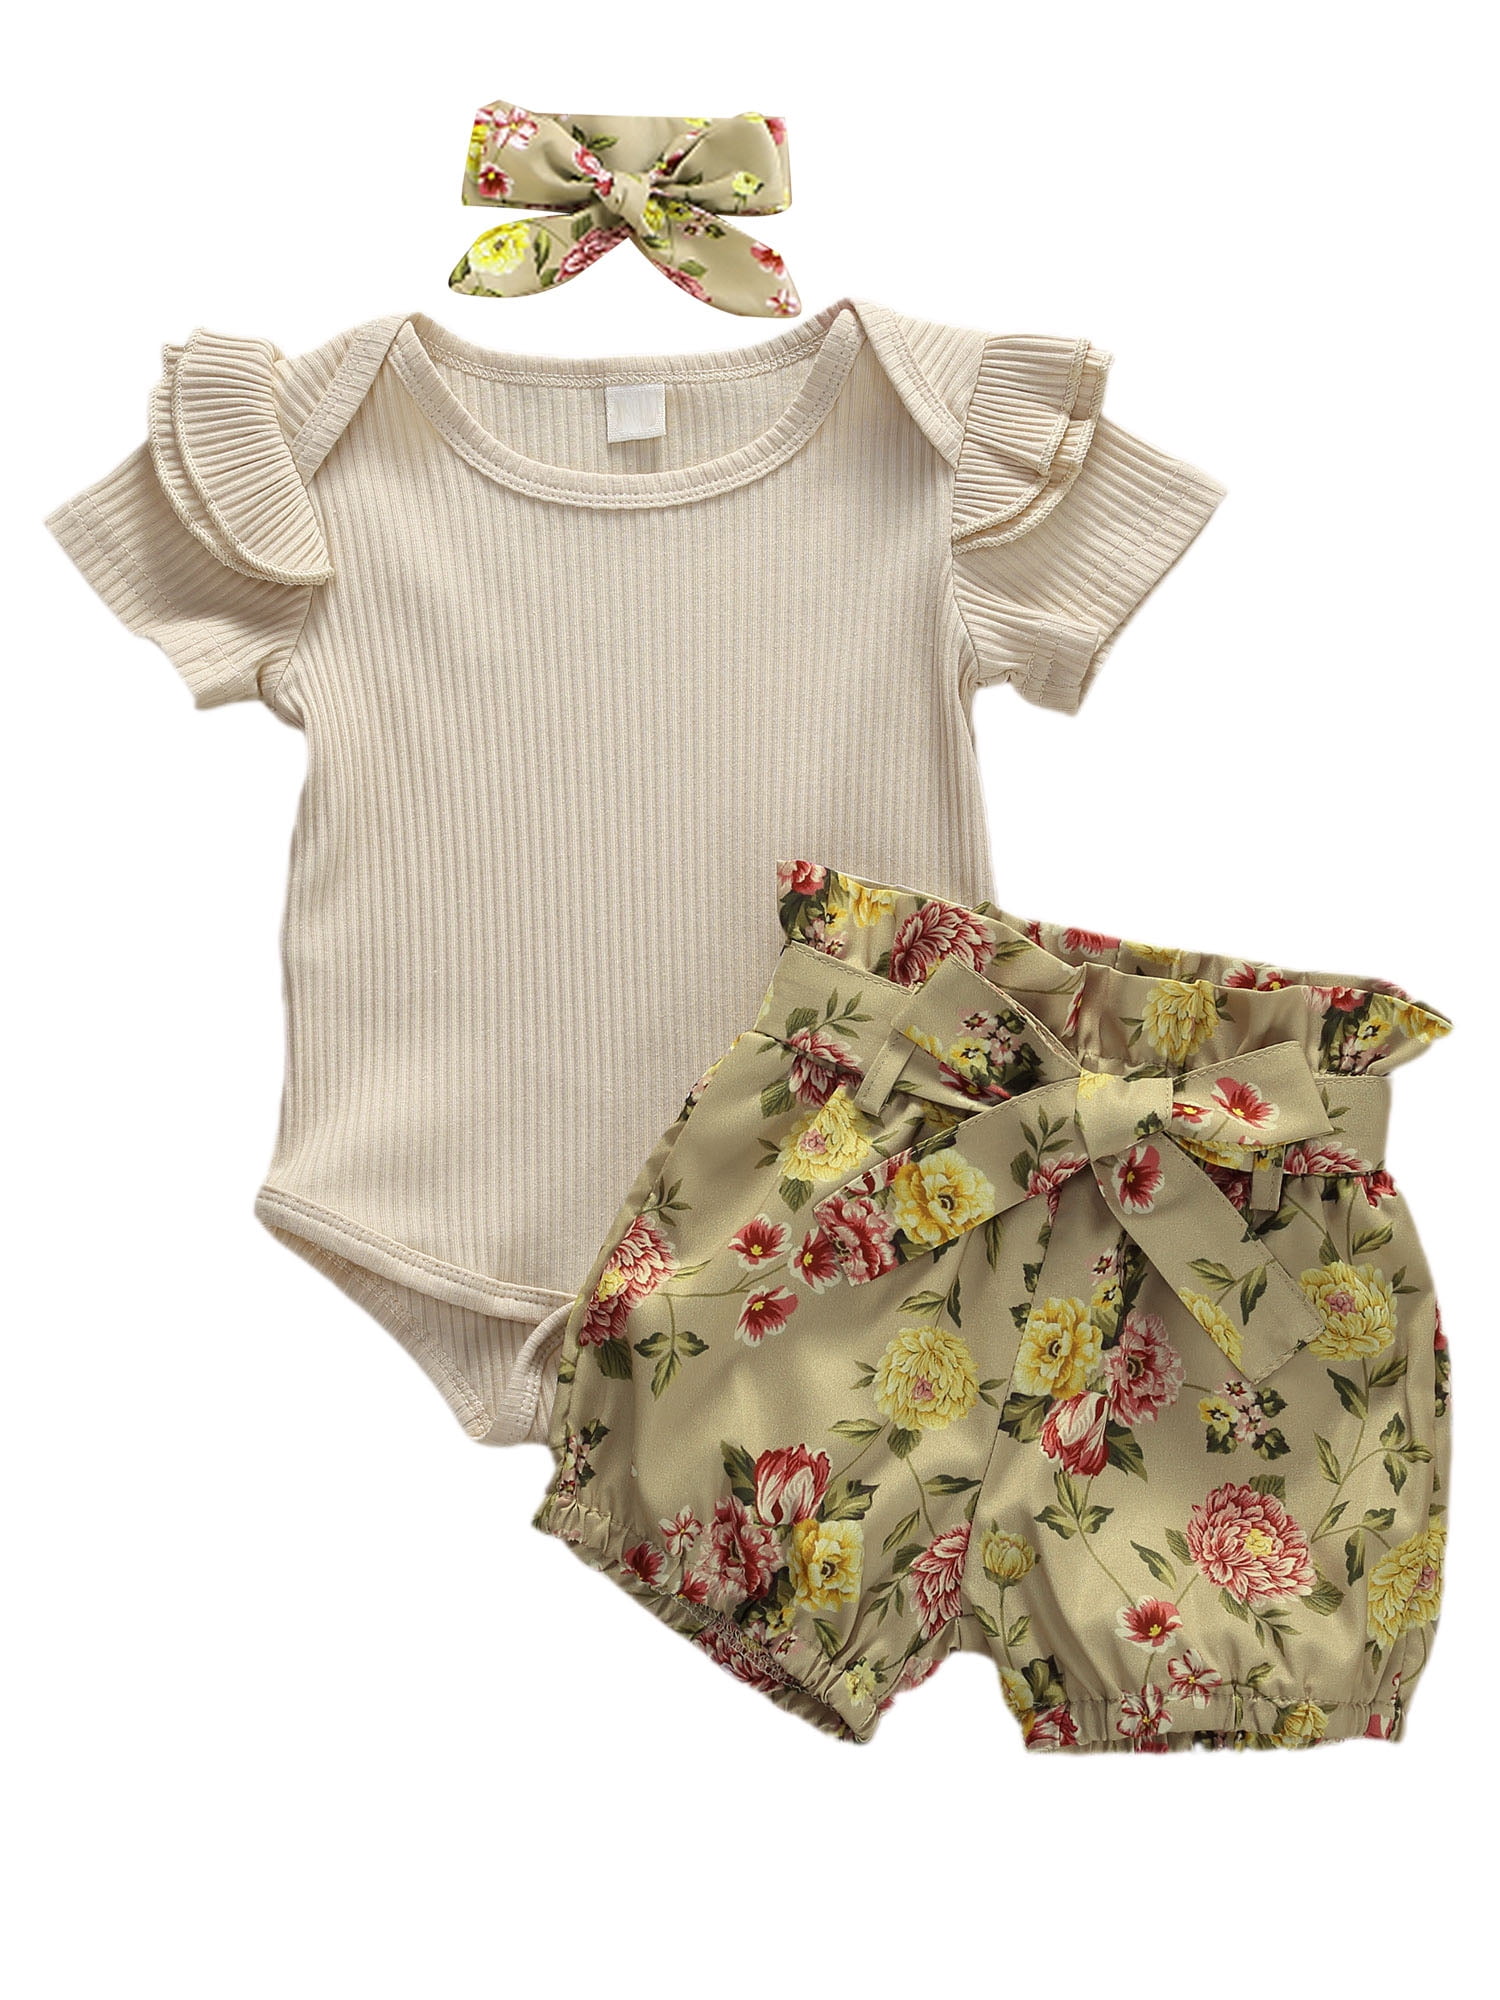 Newborn Baby Girls Clothes Floral Sleeve Romper Floral Short Pant 2pcs Summer Outfit